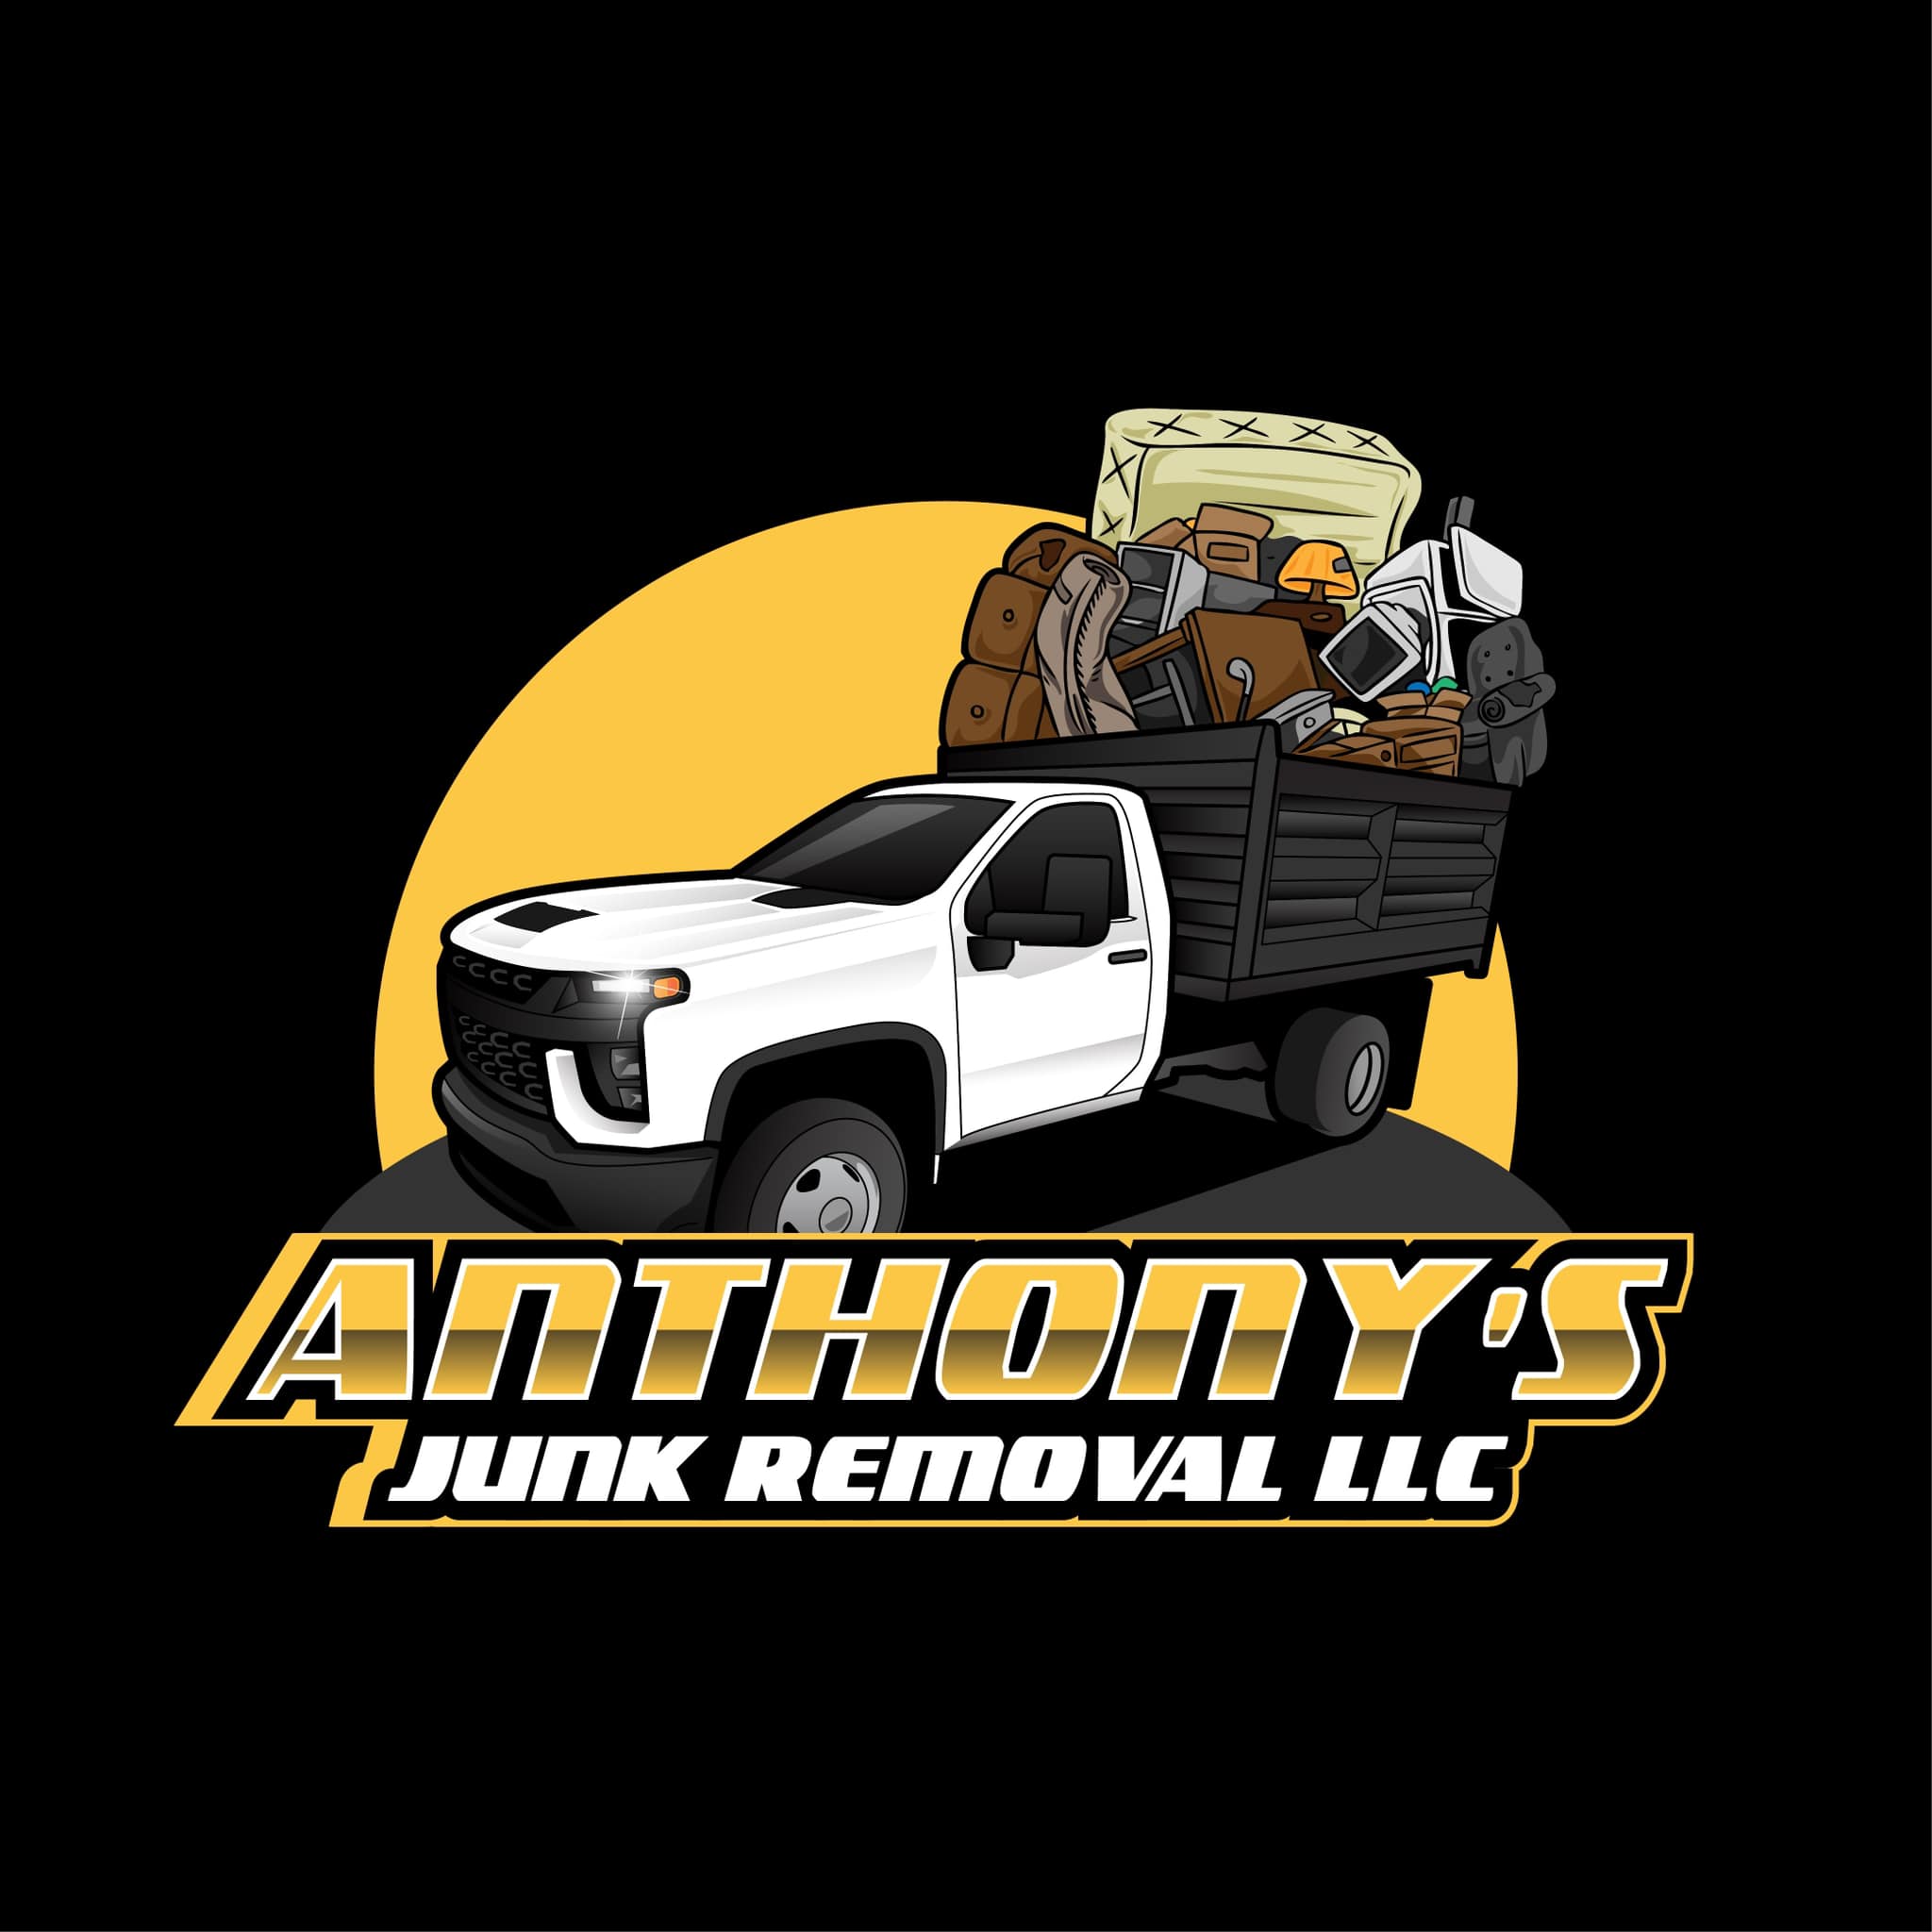 Anthony's Junk Removal LLC